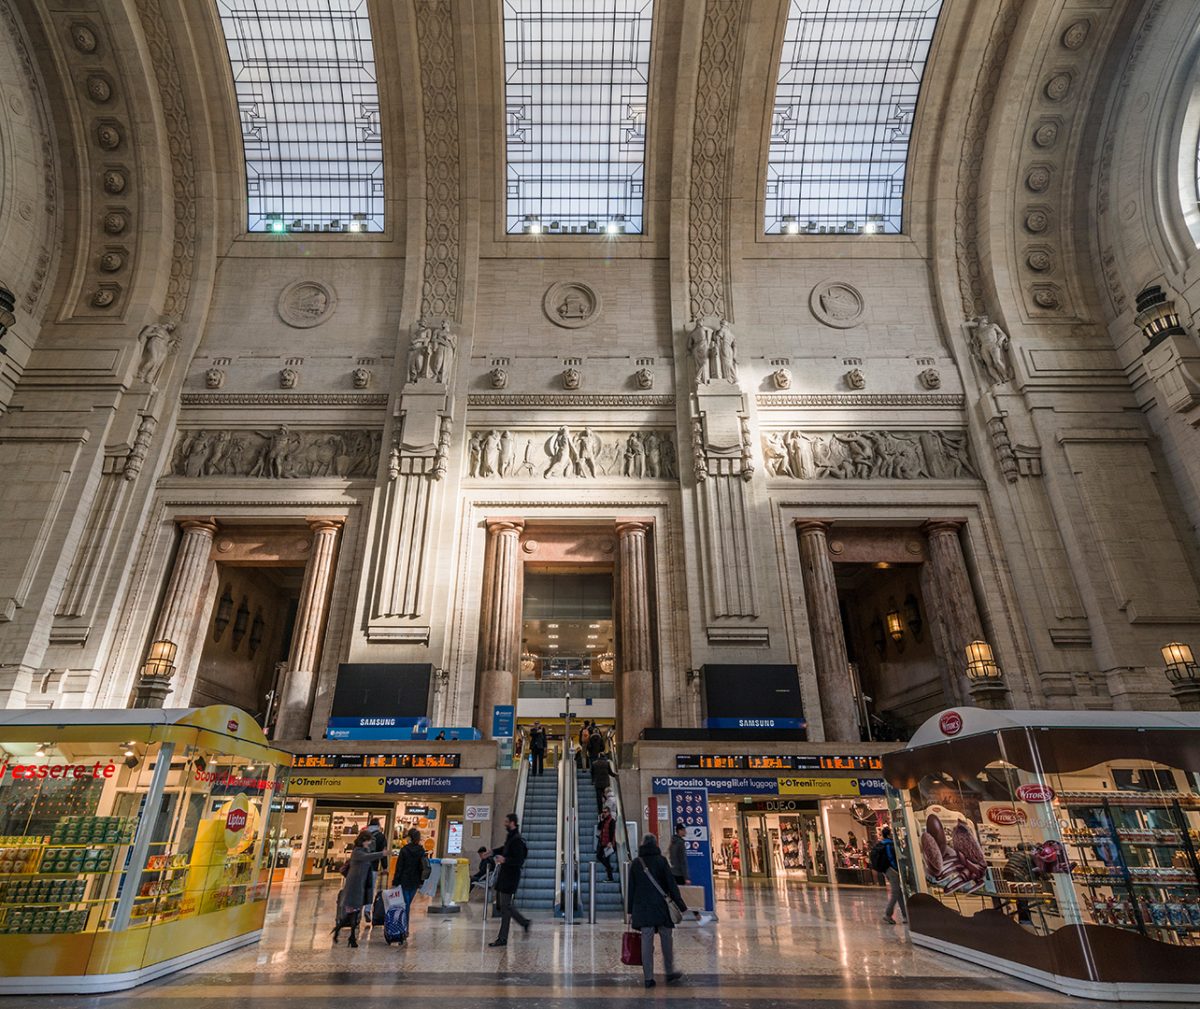 The inside of a grand train station in Italy, with an intricate architecture featuring classical statues and a glass ceiling.